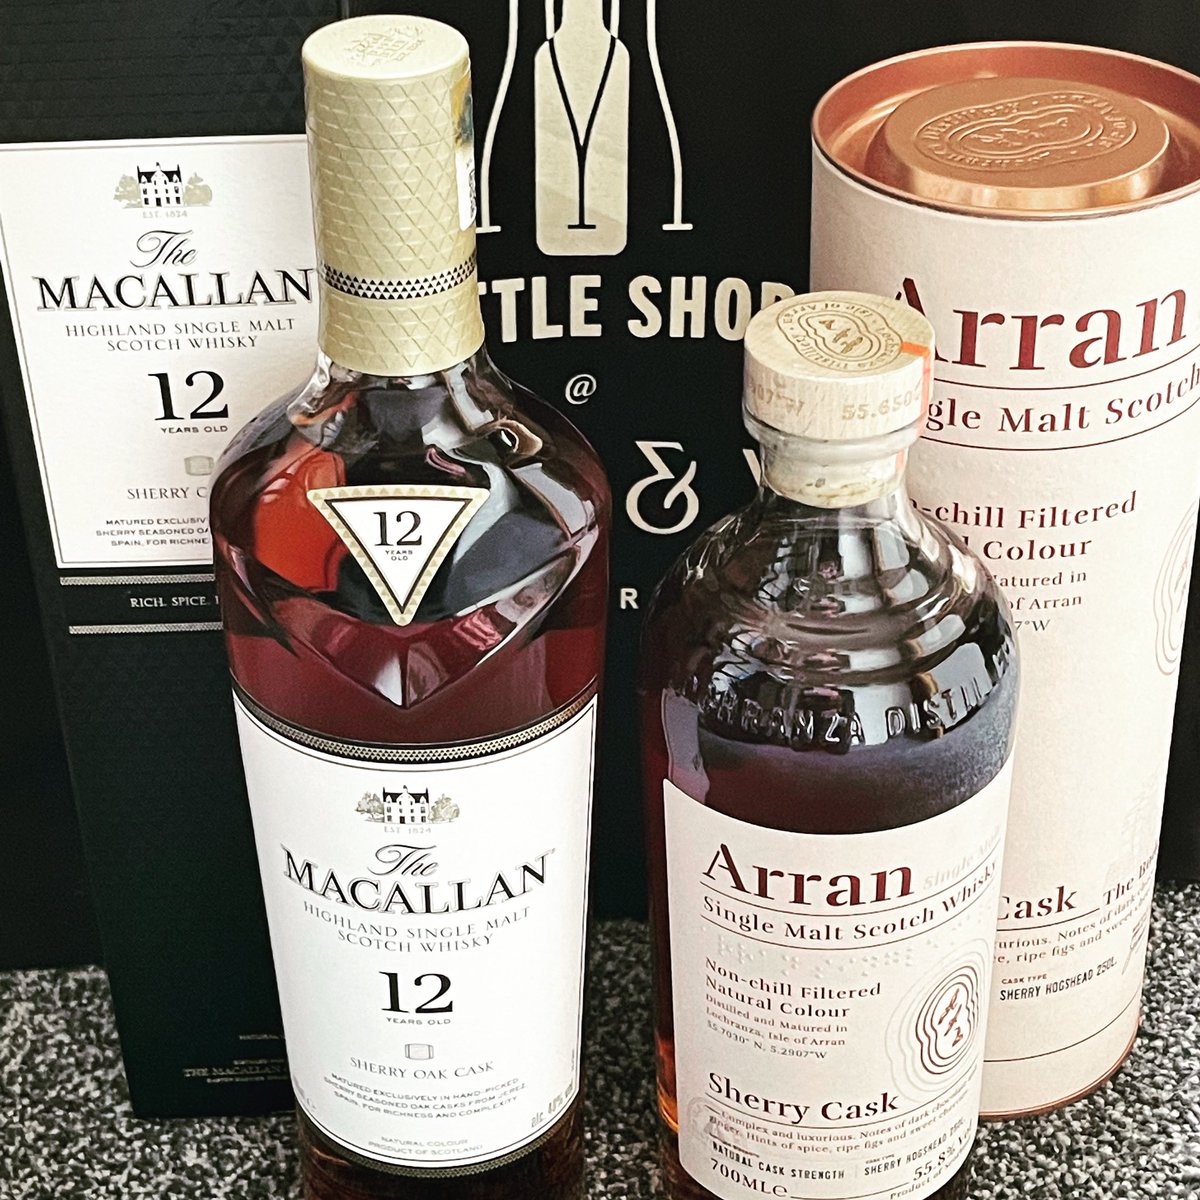 When you have a client arriving next week who has a particular taste for sherry finished whisky…

A big thank you to @IMBottleShop for helping out. 👏

#golf #whisky #sherrycask #golfers #golfing #scotland #travel #mortongolf @BonnieMarket @Arranwhisky @The_Macallan